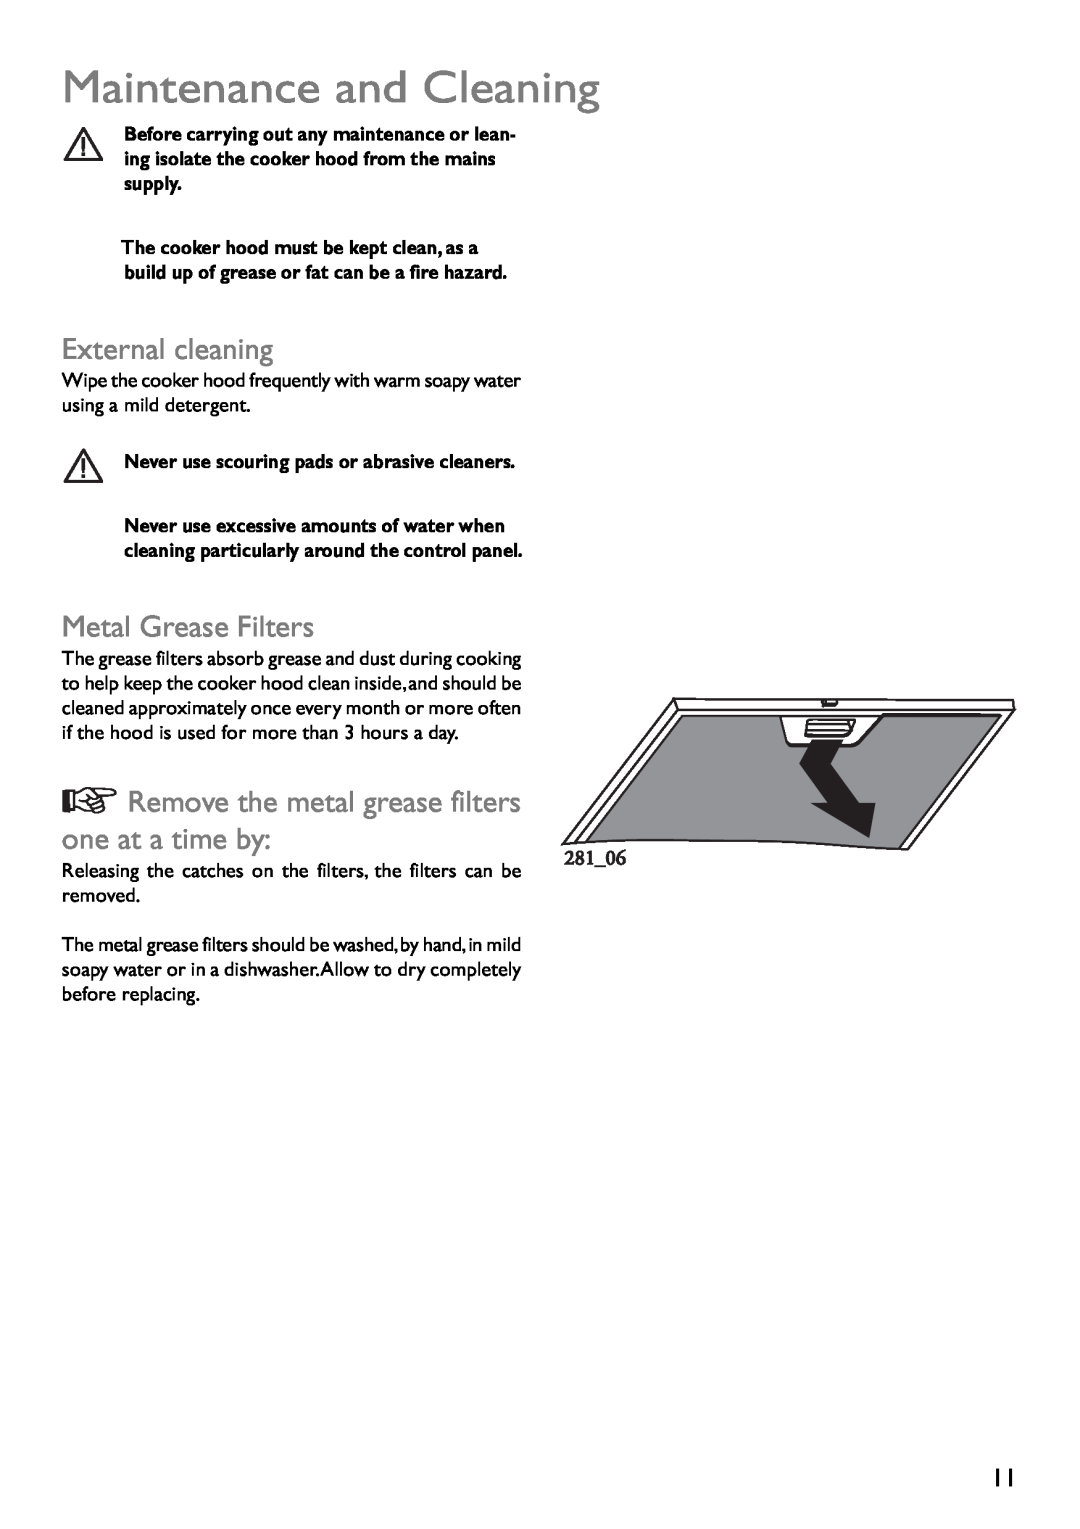 John Lewis JLBIHD904, JLBIHD603 instruction manual Maintenance and Cleaning, External cleaning, Metal Grease Filters 